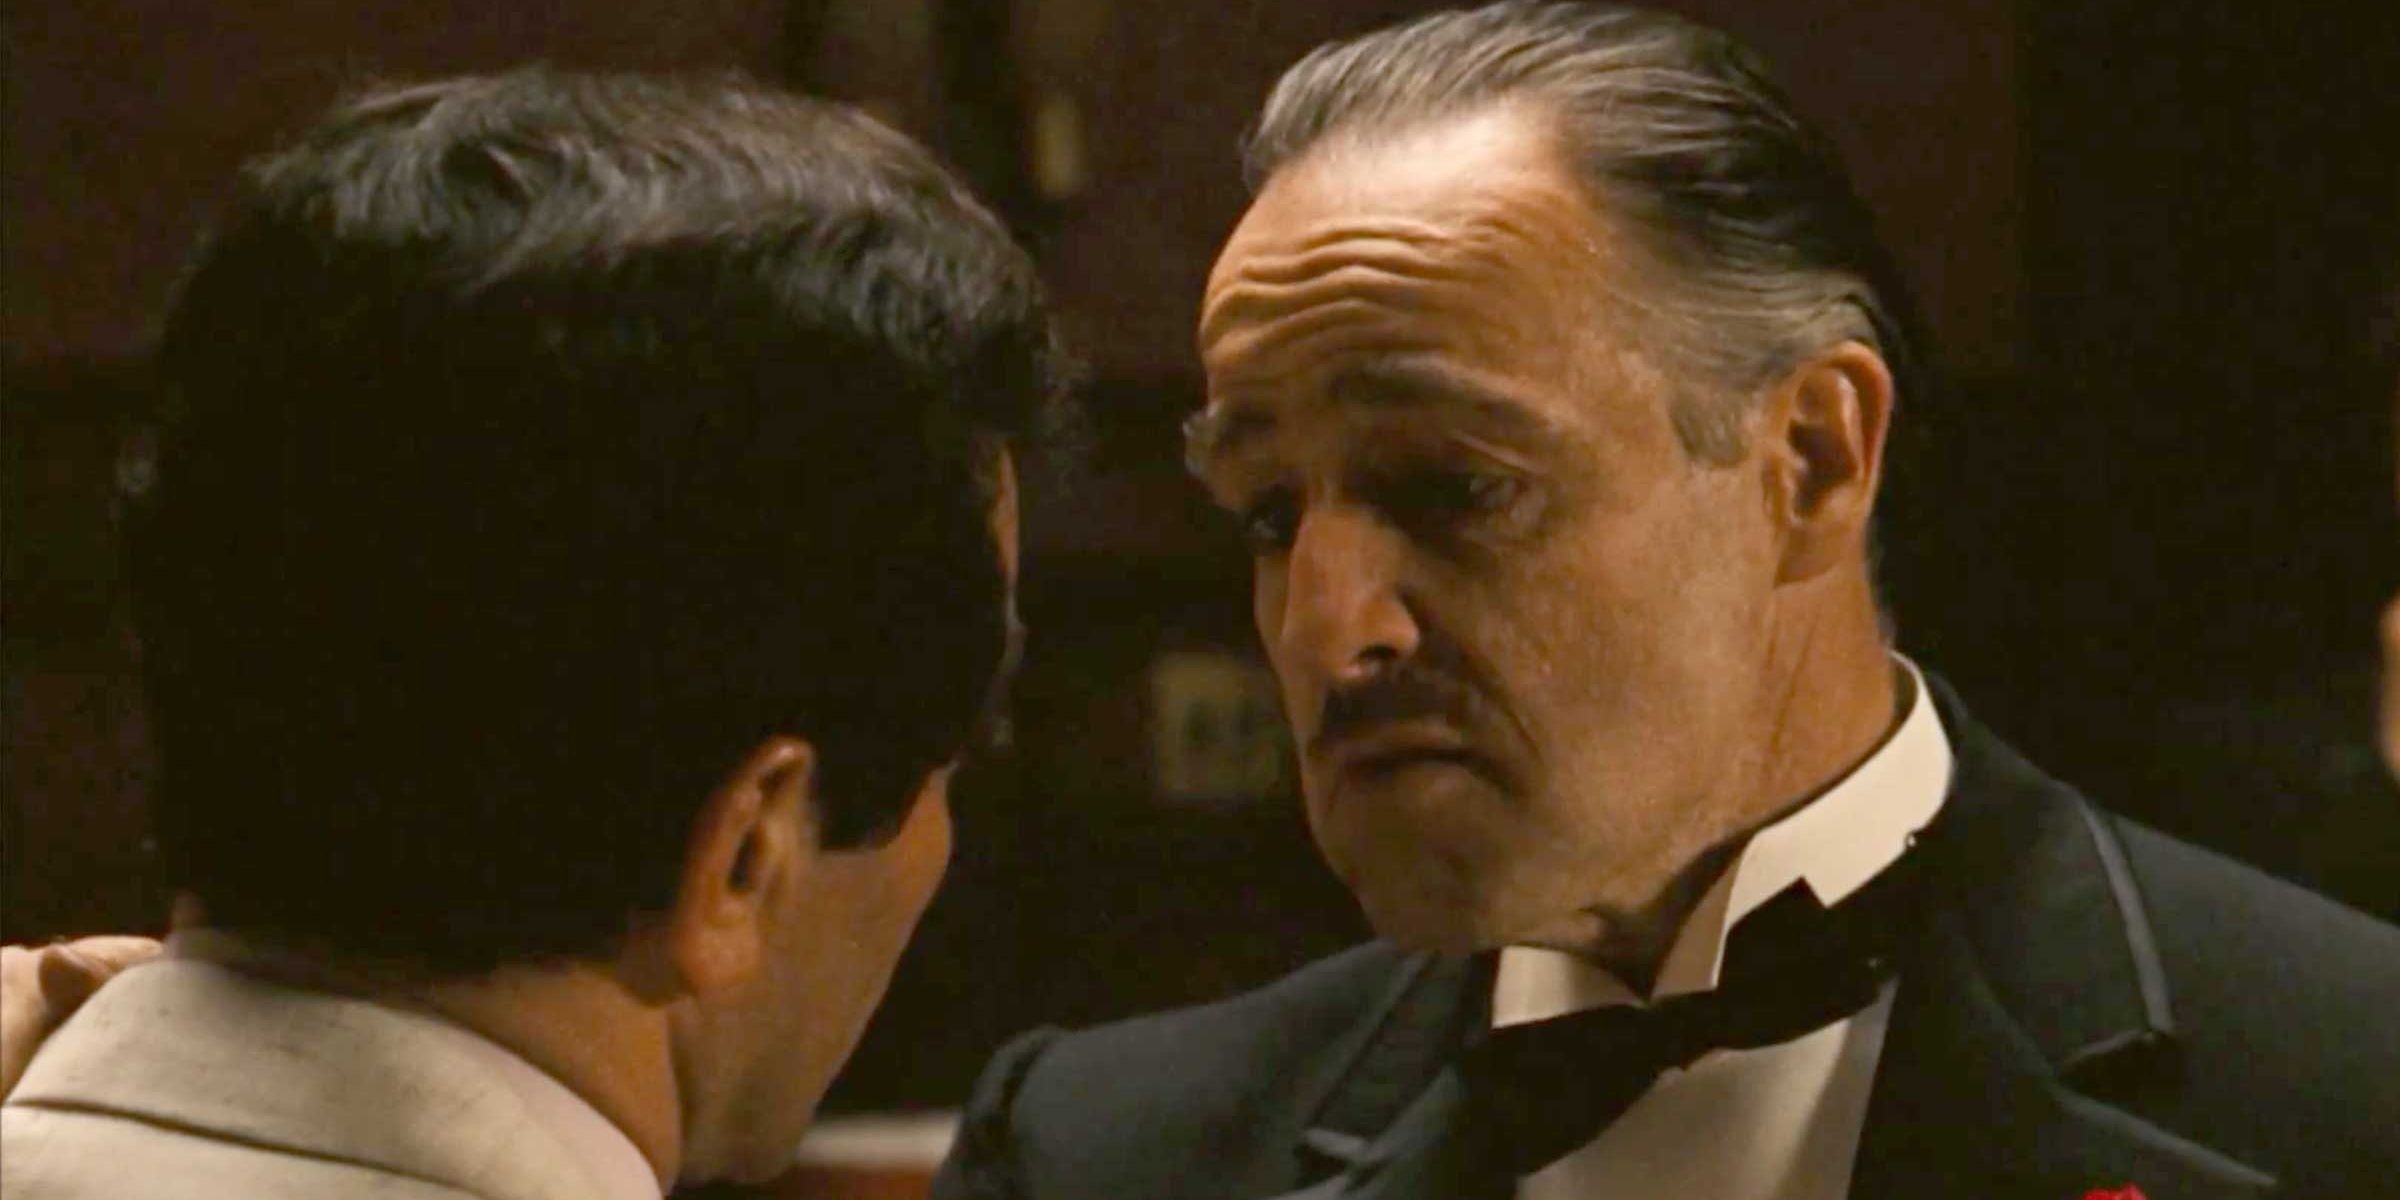 Vito warns Michael about Barzini in The Godfather